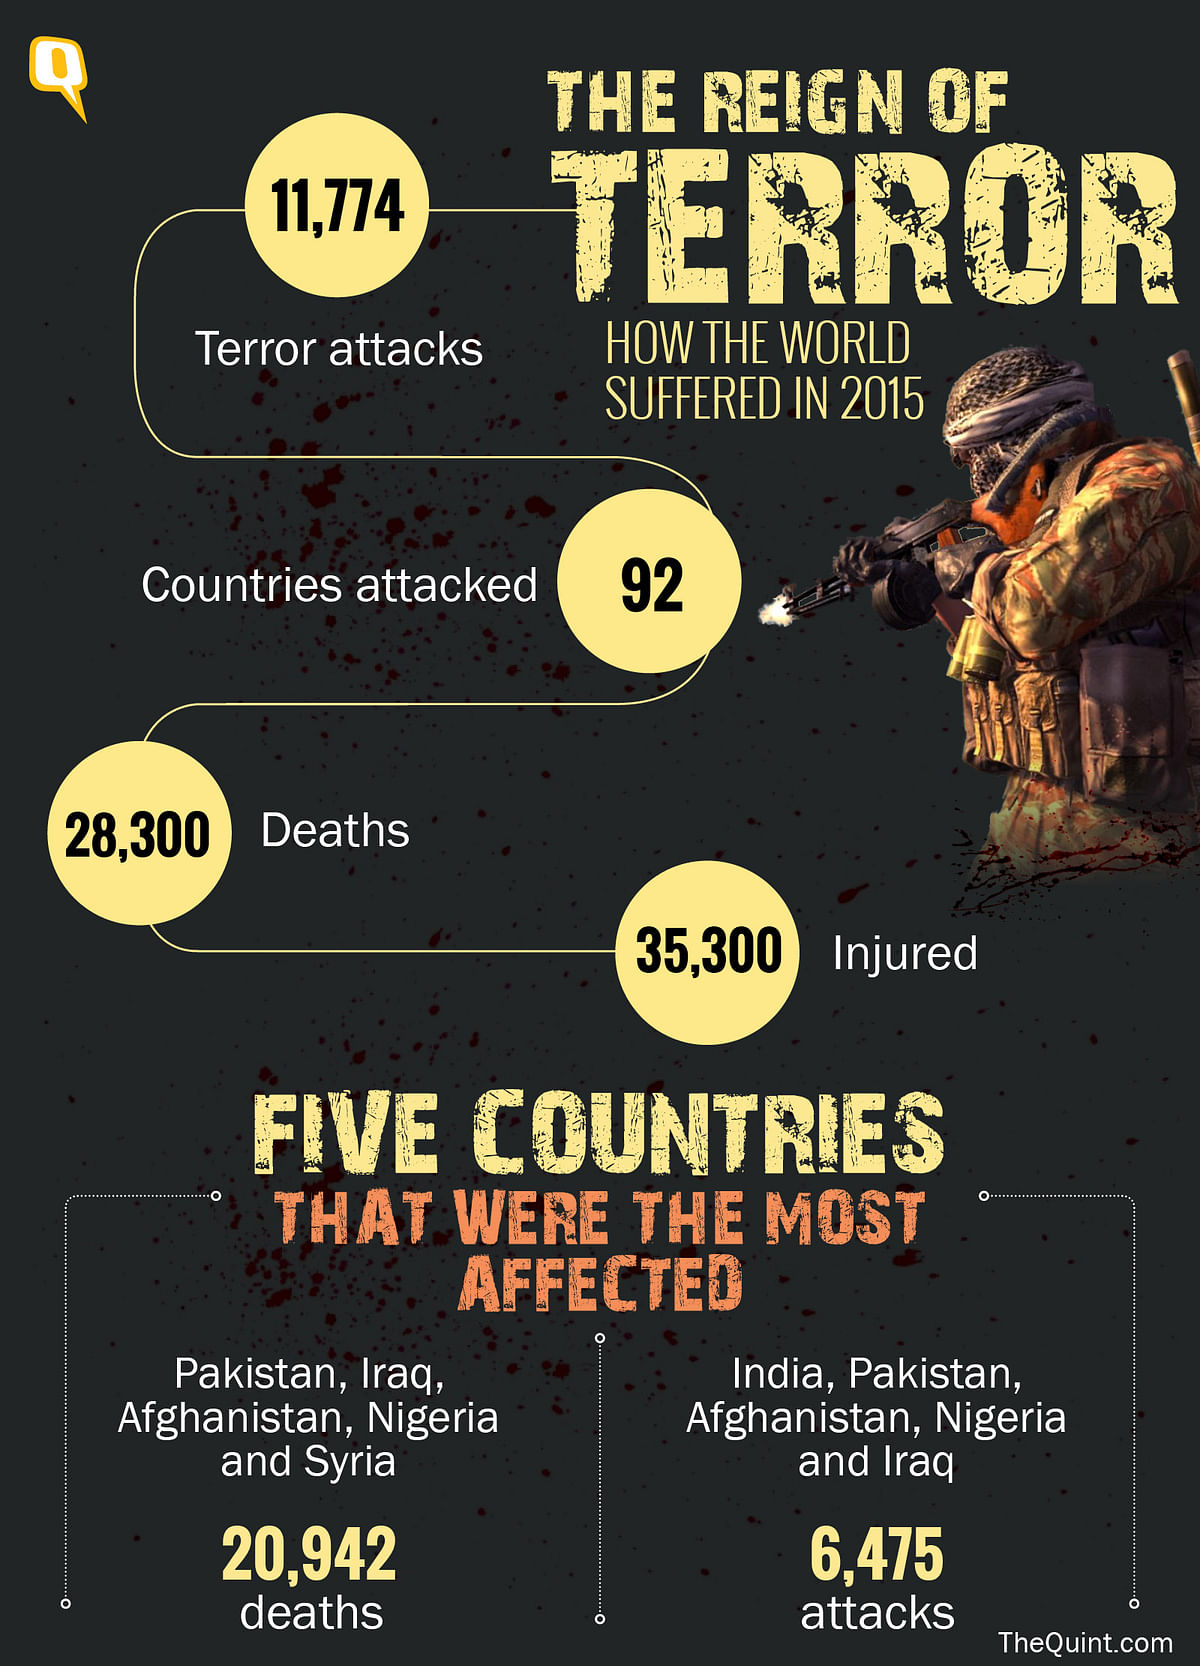 India, Pakistan, Iraq, Afghanistan and Nigeria were most affected by terrorism last year.